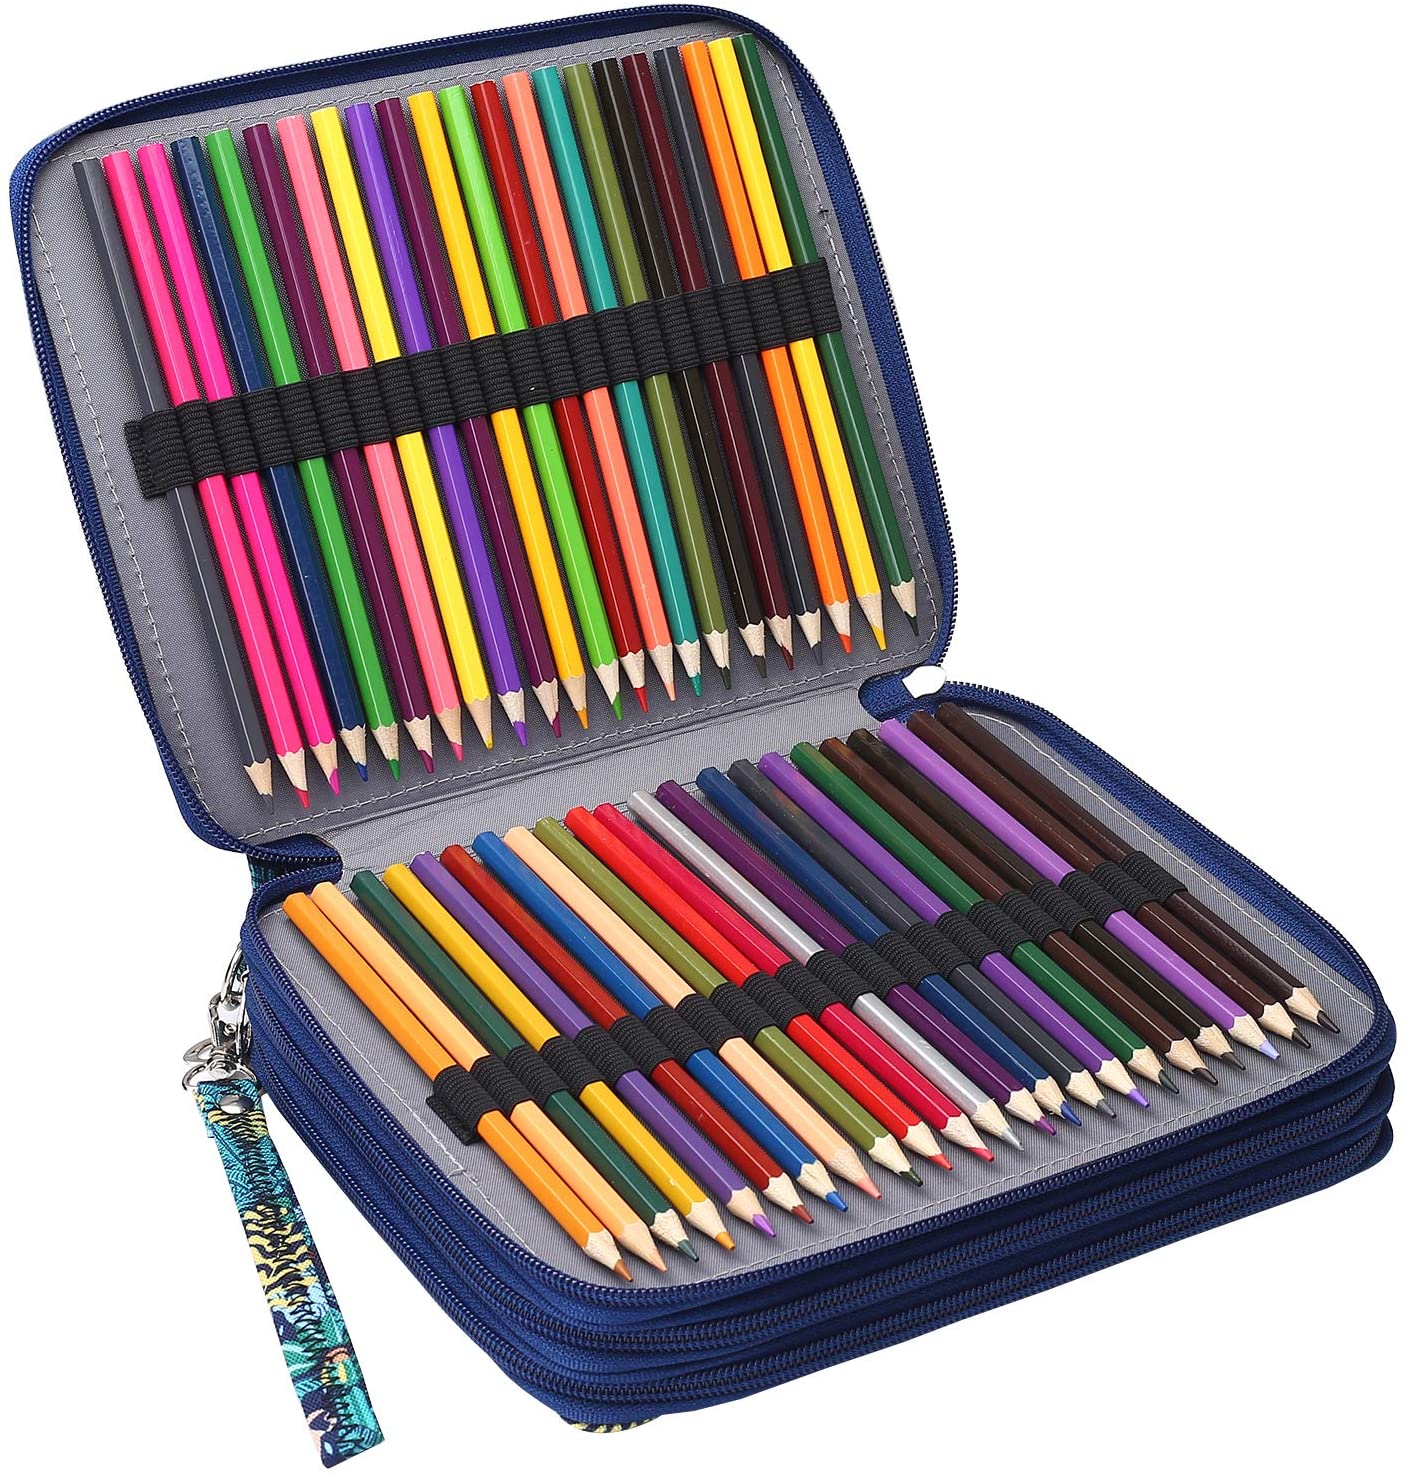 Shulaner Coloured Pencil Case 120 Slots with 3 Zipper Closure